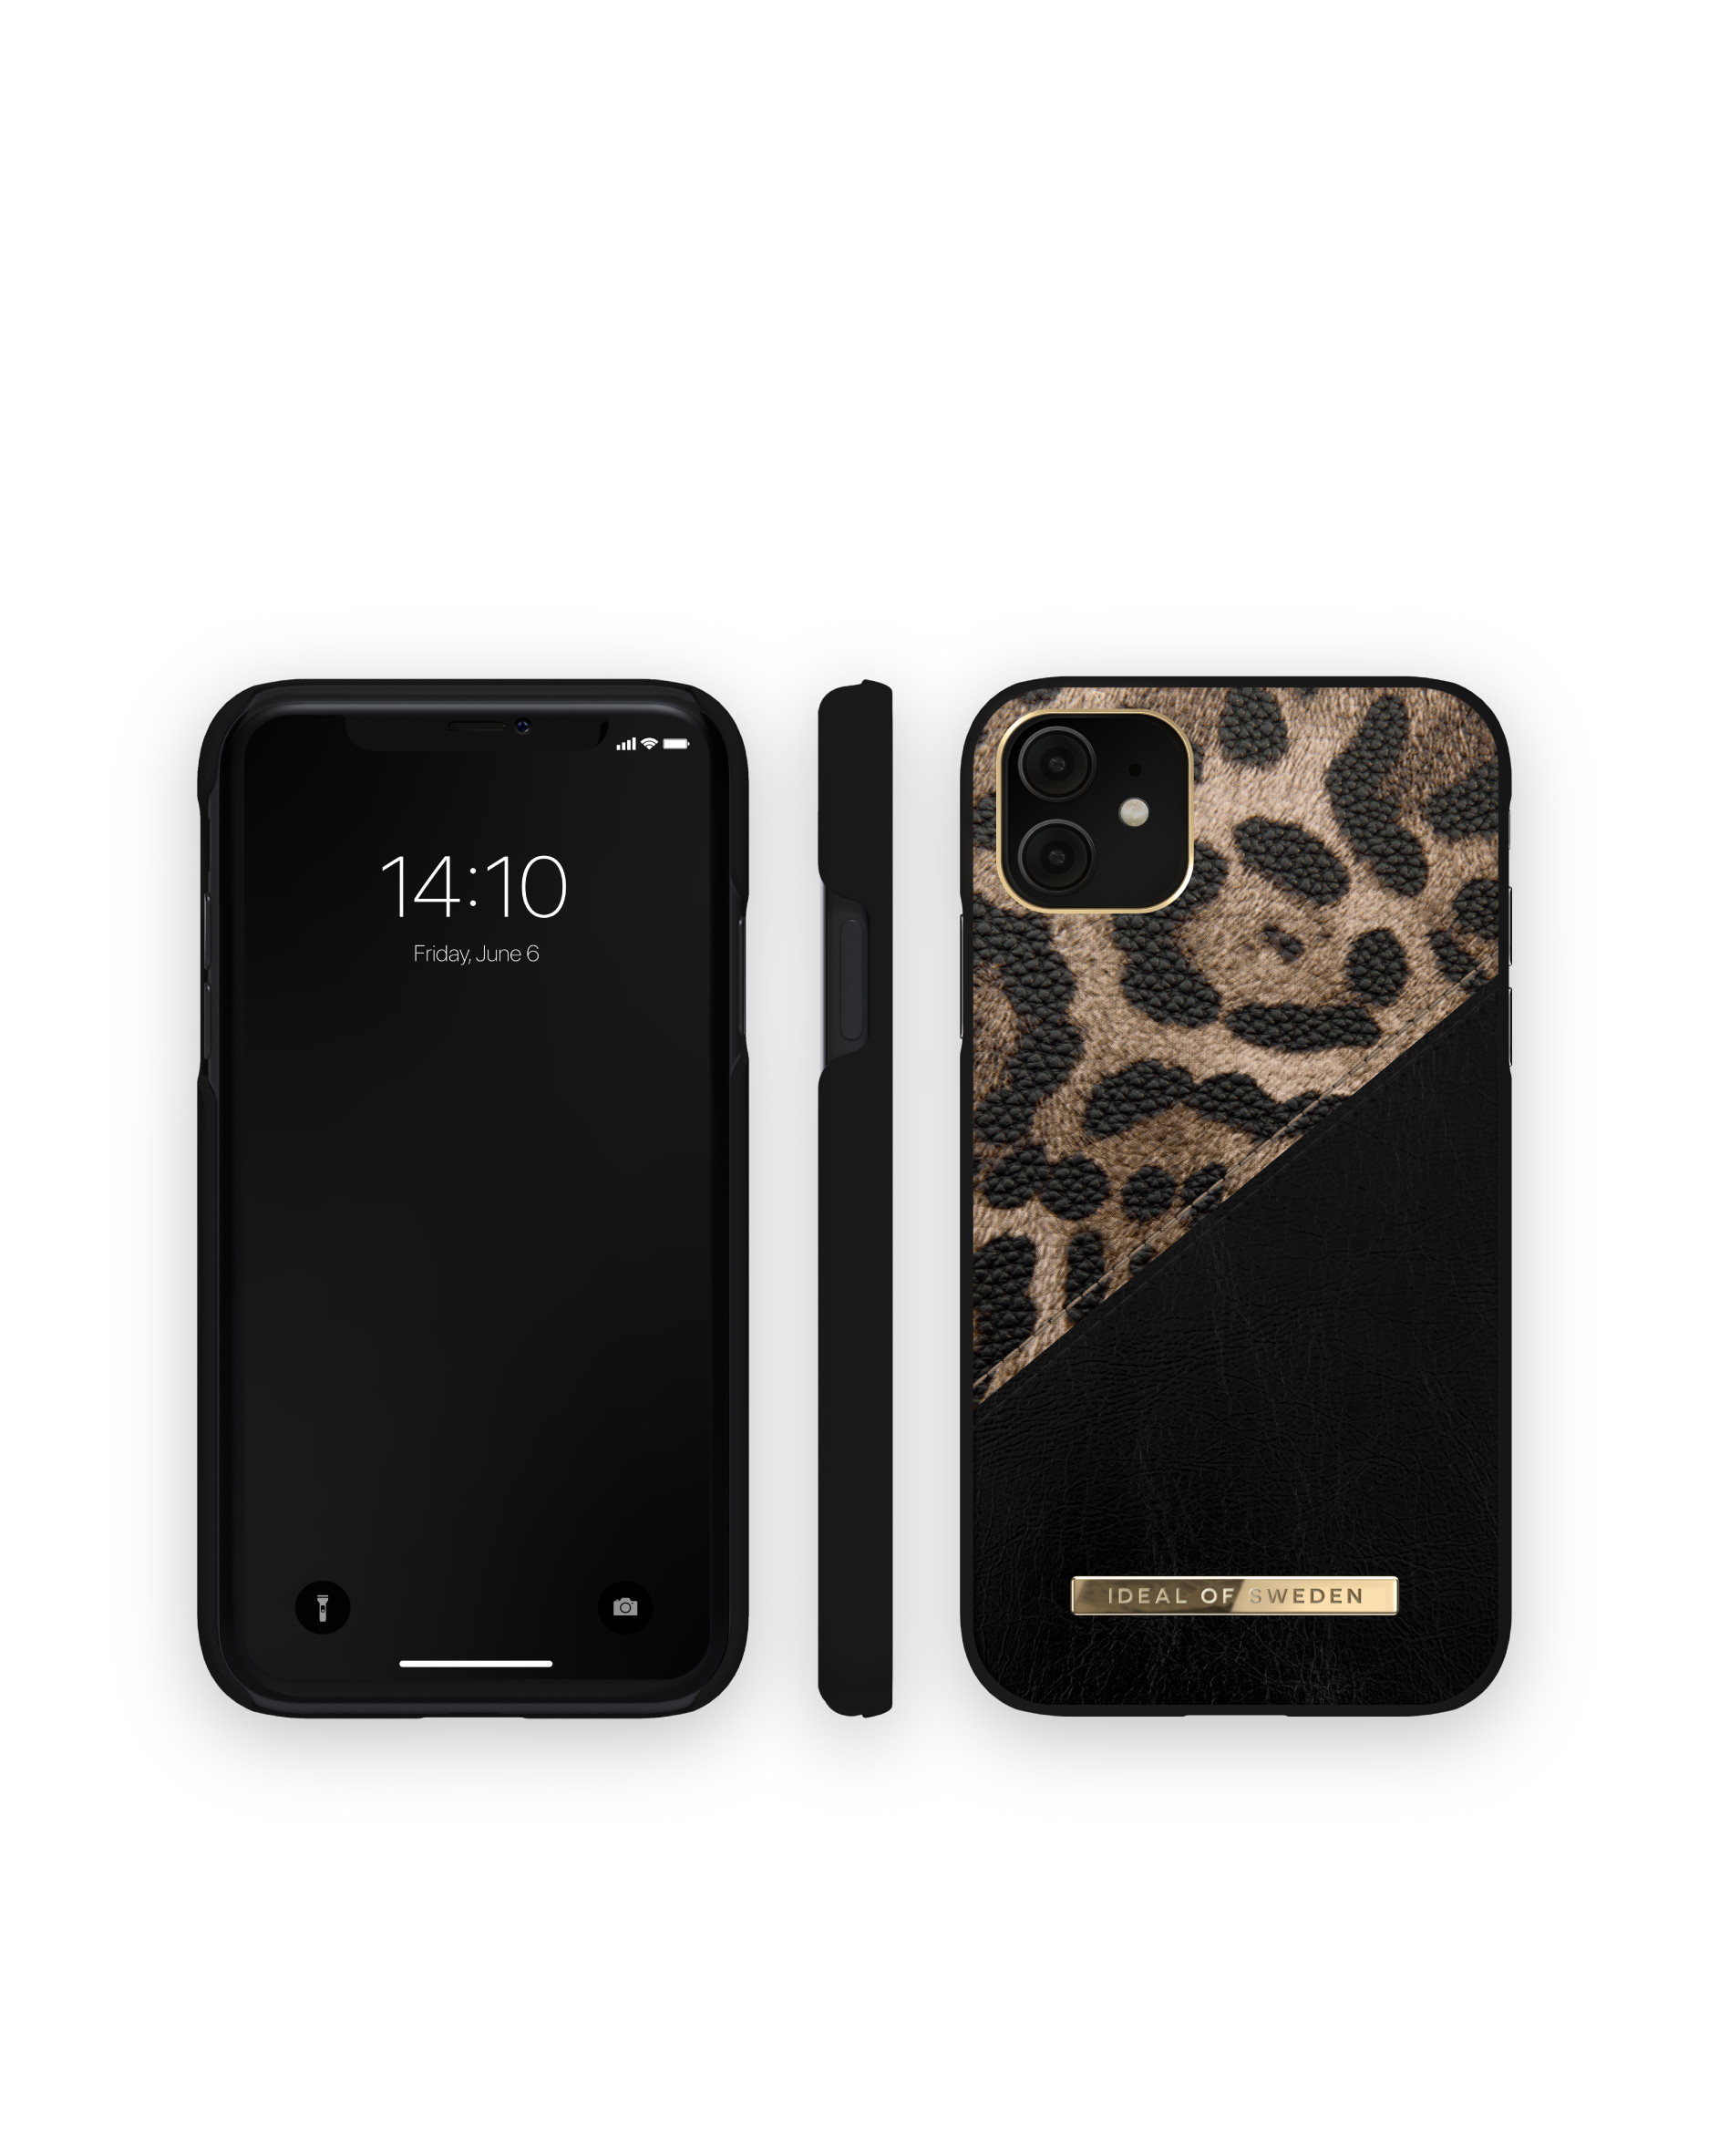 IDEAL OF iPhone 11/XR, Midnight Leopard IDACAW21-I1961-330, Apple, Backcover, SWEDEN